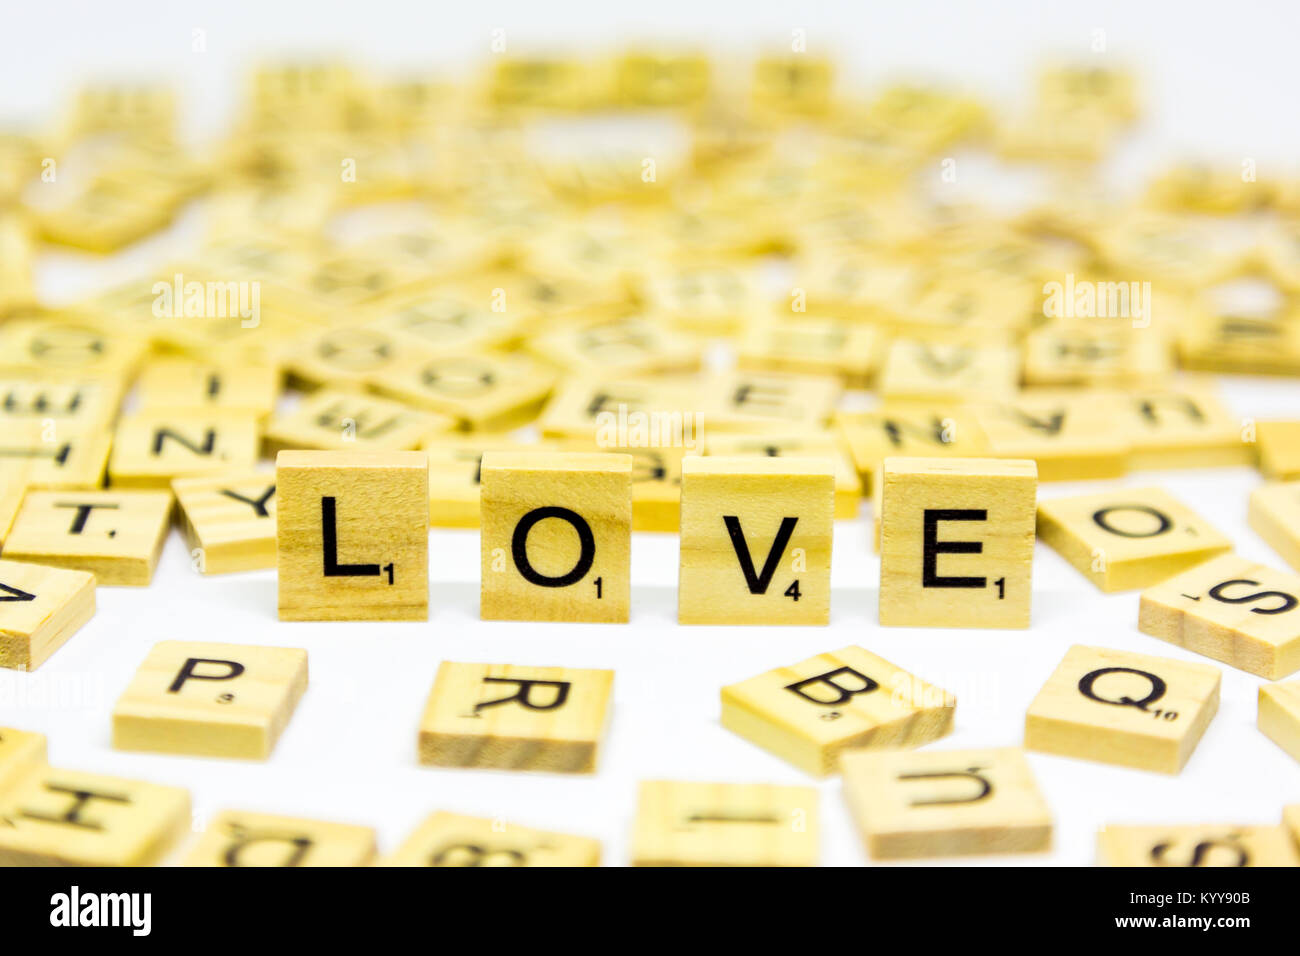 The word love standing up made from wooden scrabble letters on a white background Stock Photo